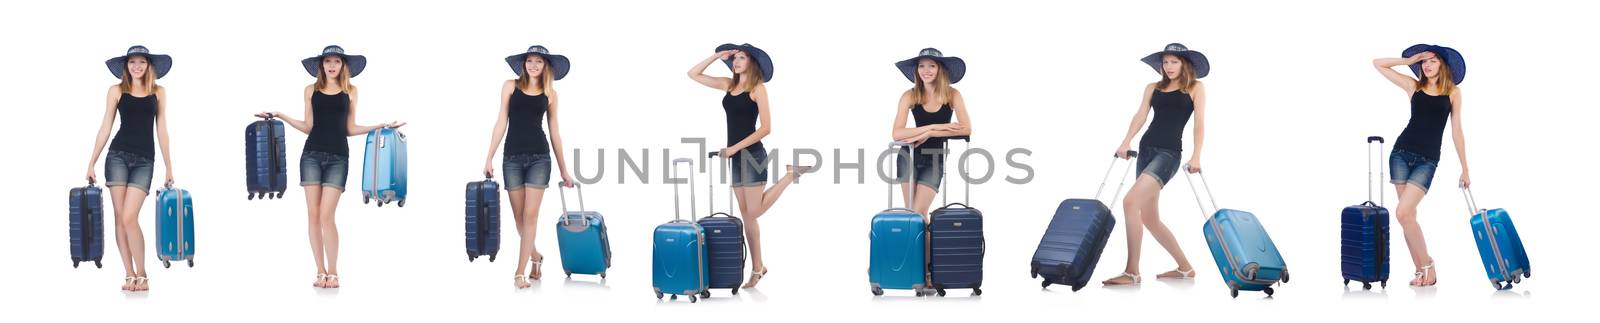 Girl with suitcases isolated on white by Elnur